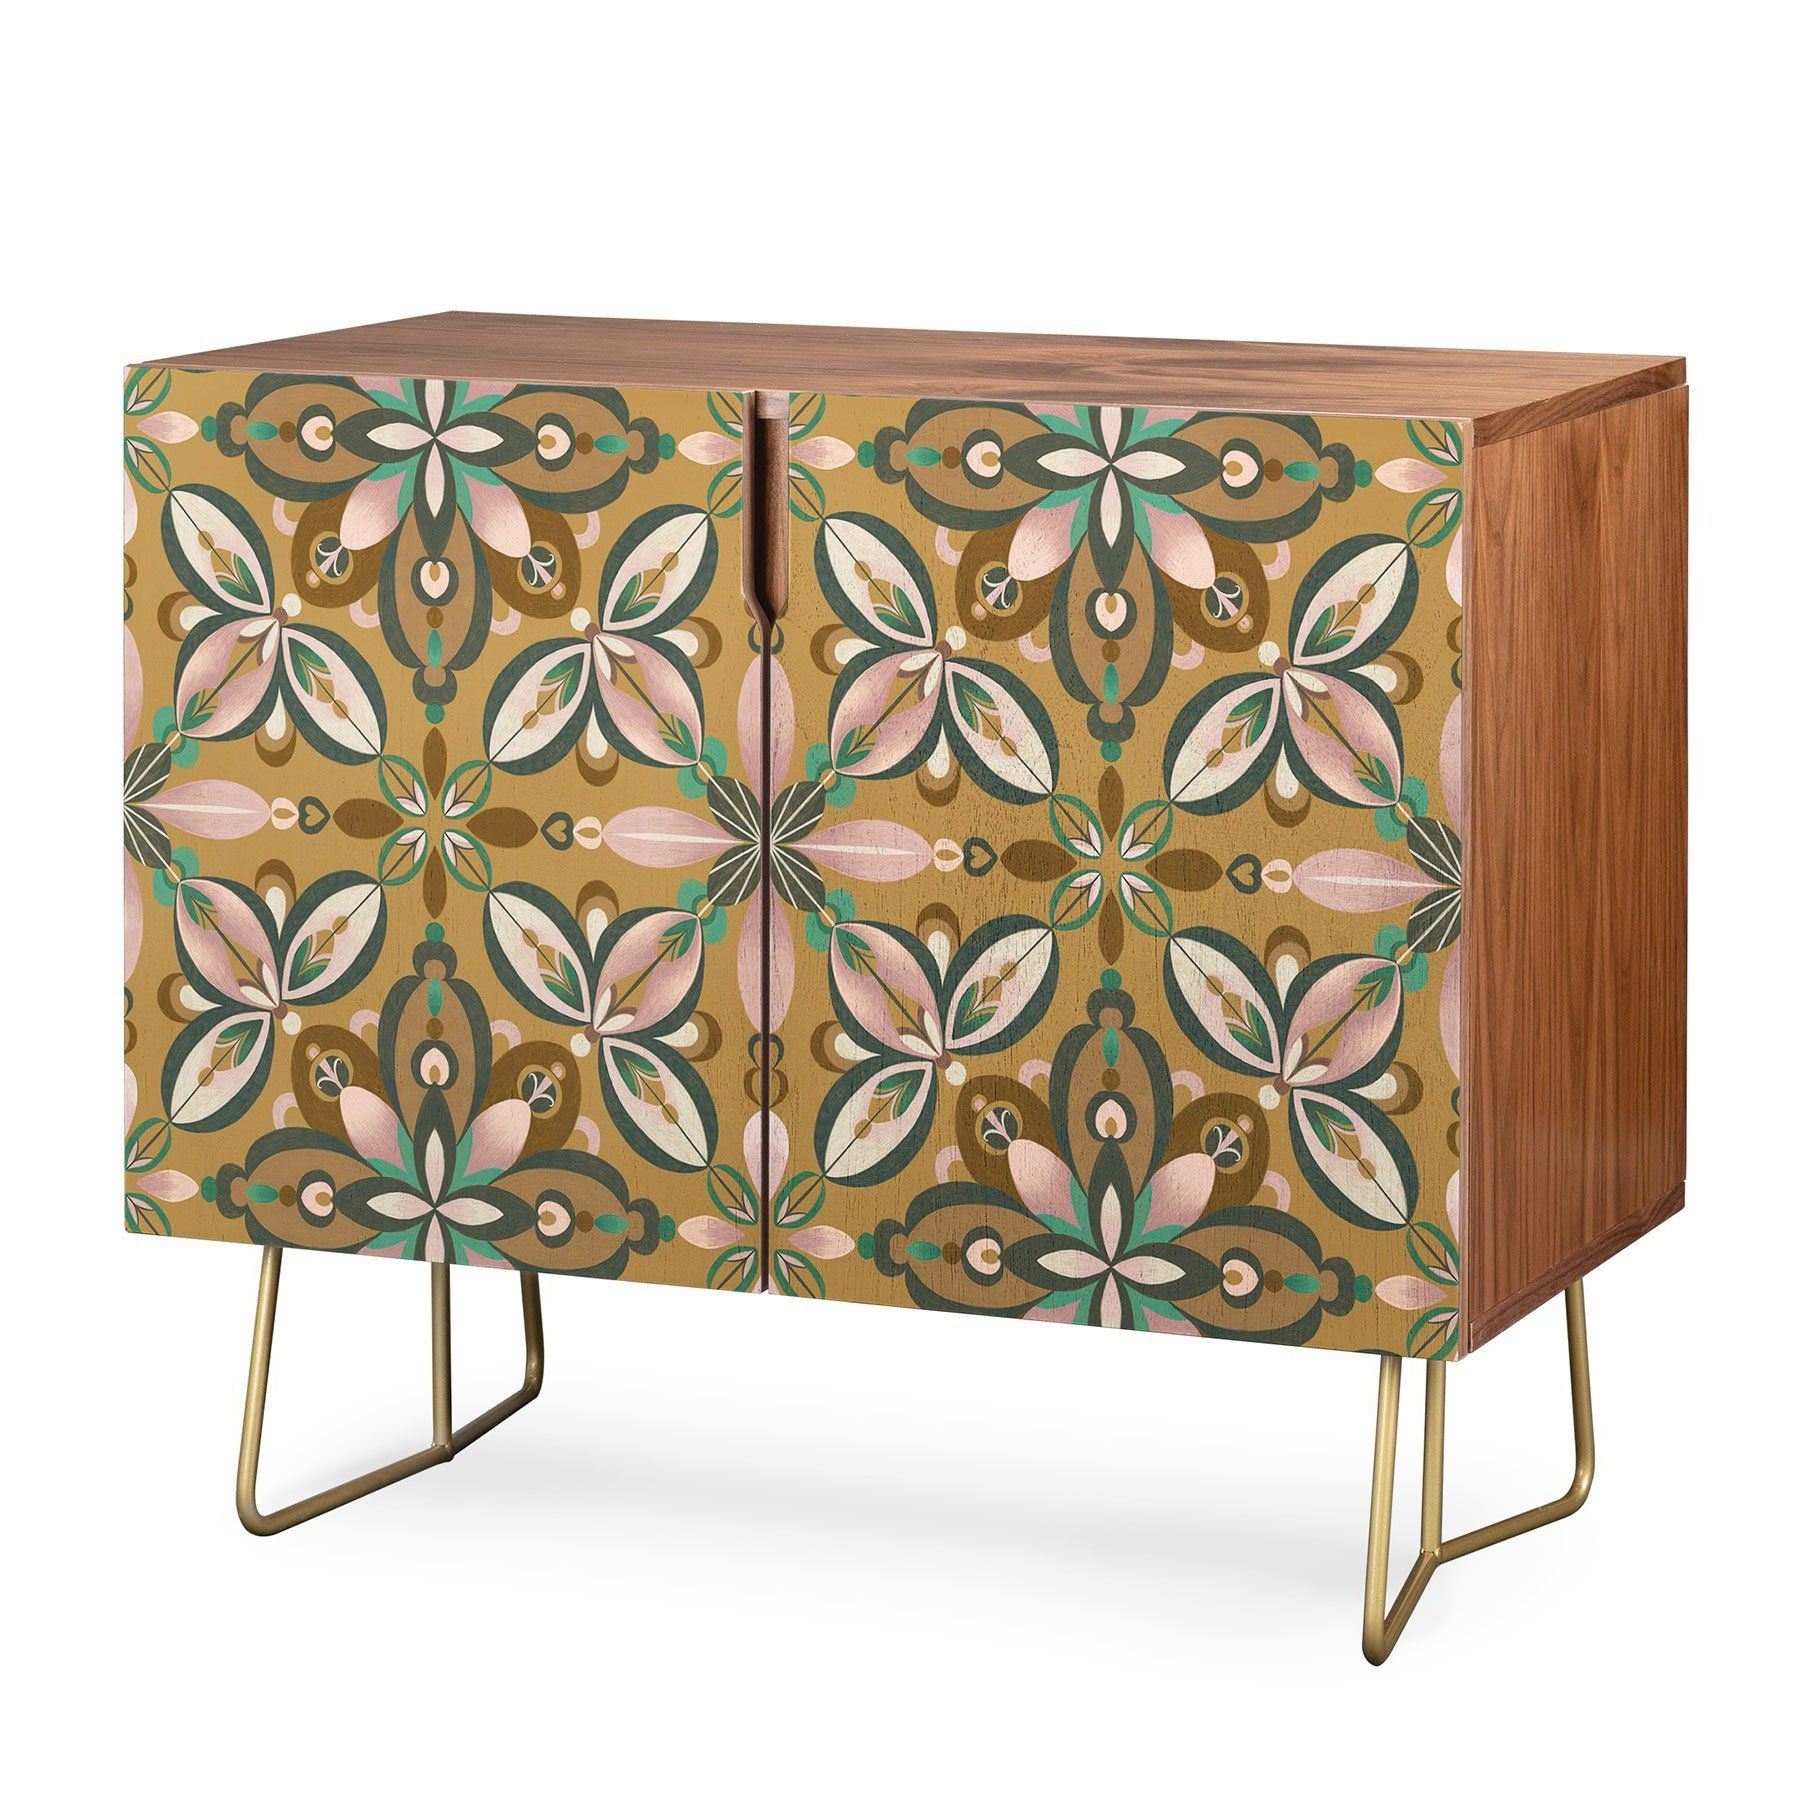 Pimlada Phuapradit Floral Tile In Yellow Ochre Credenza In For Lovely Floral Credenzas (View 5 of 20)